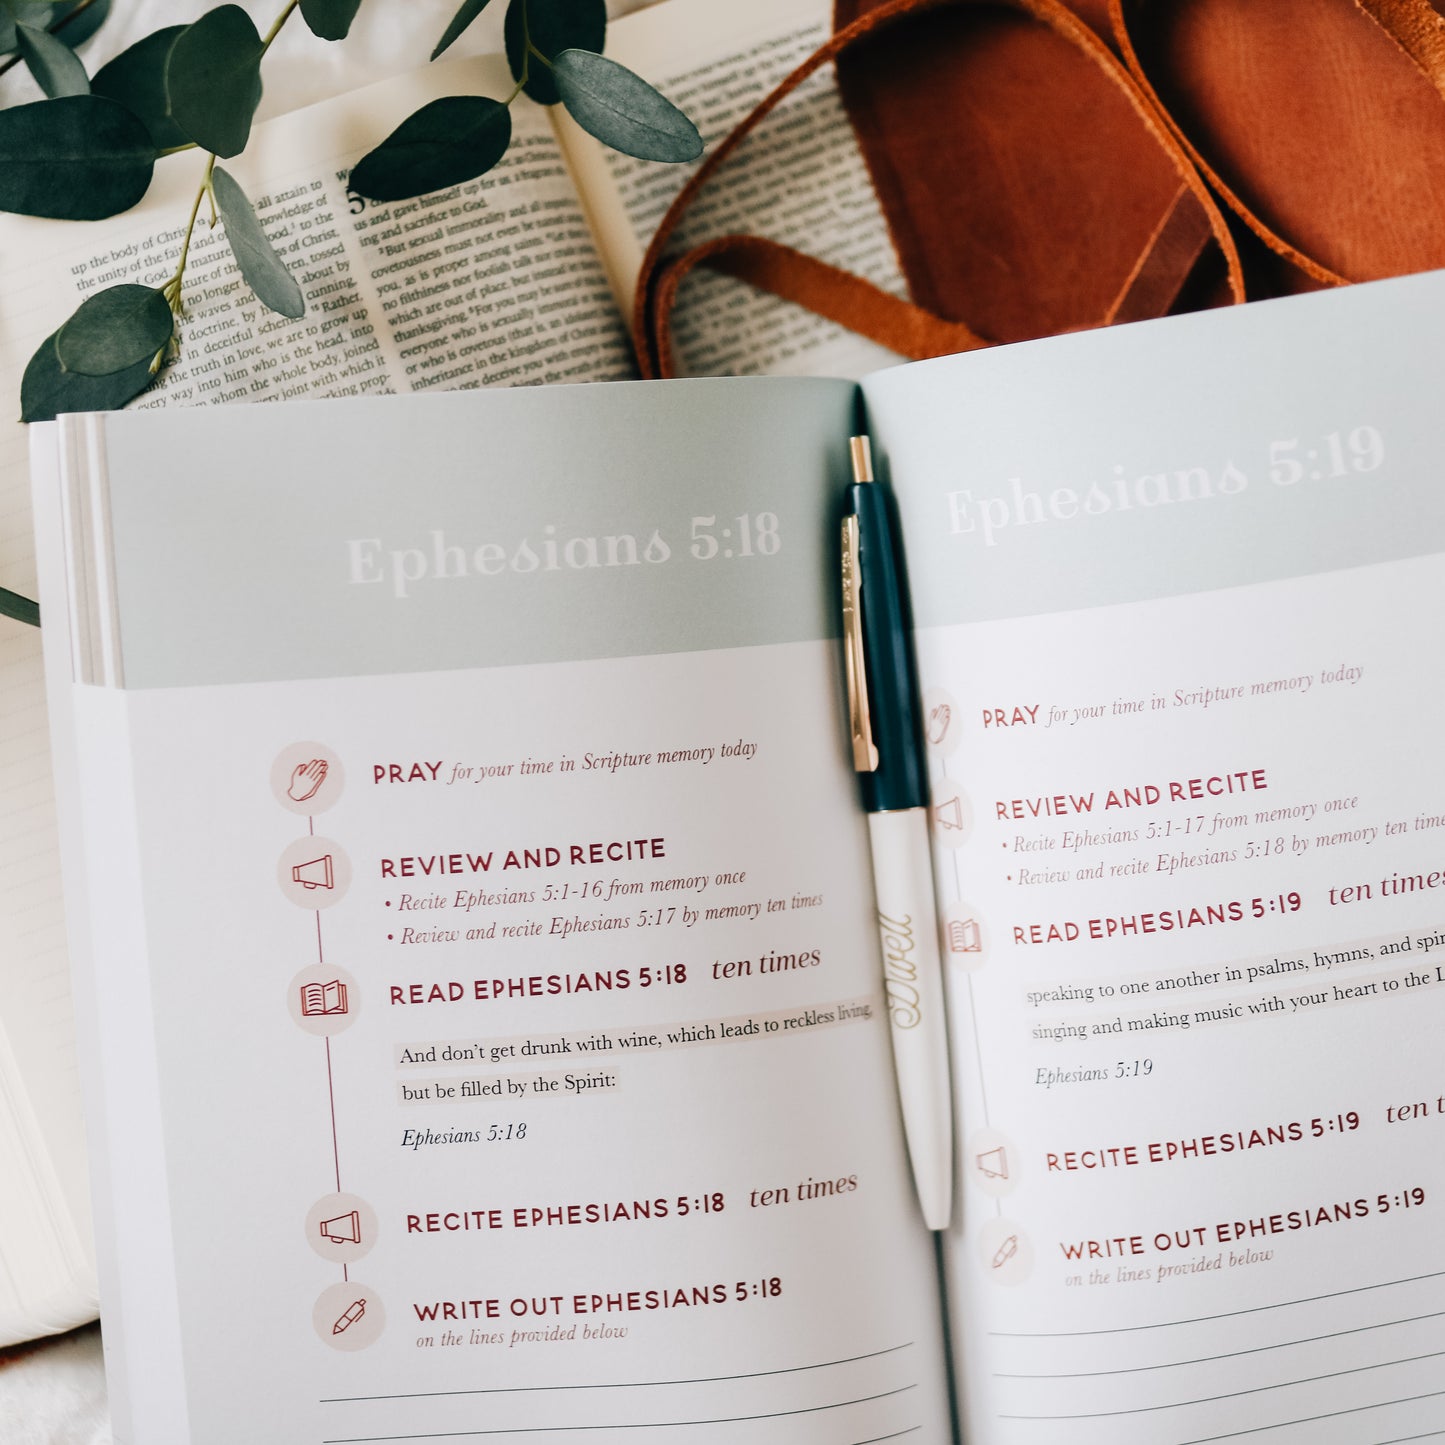 Dwell Scripture Memory Journal - Walking by Faith